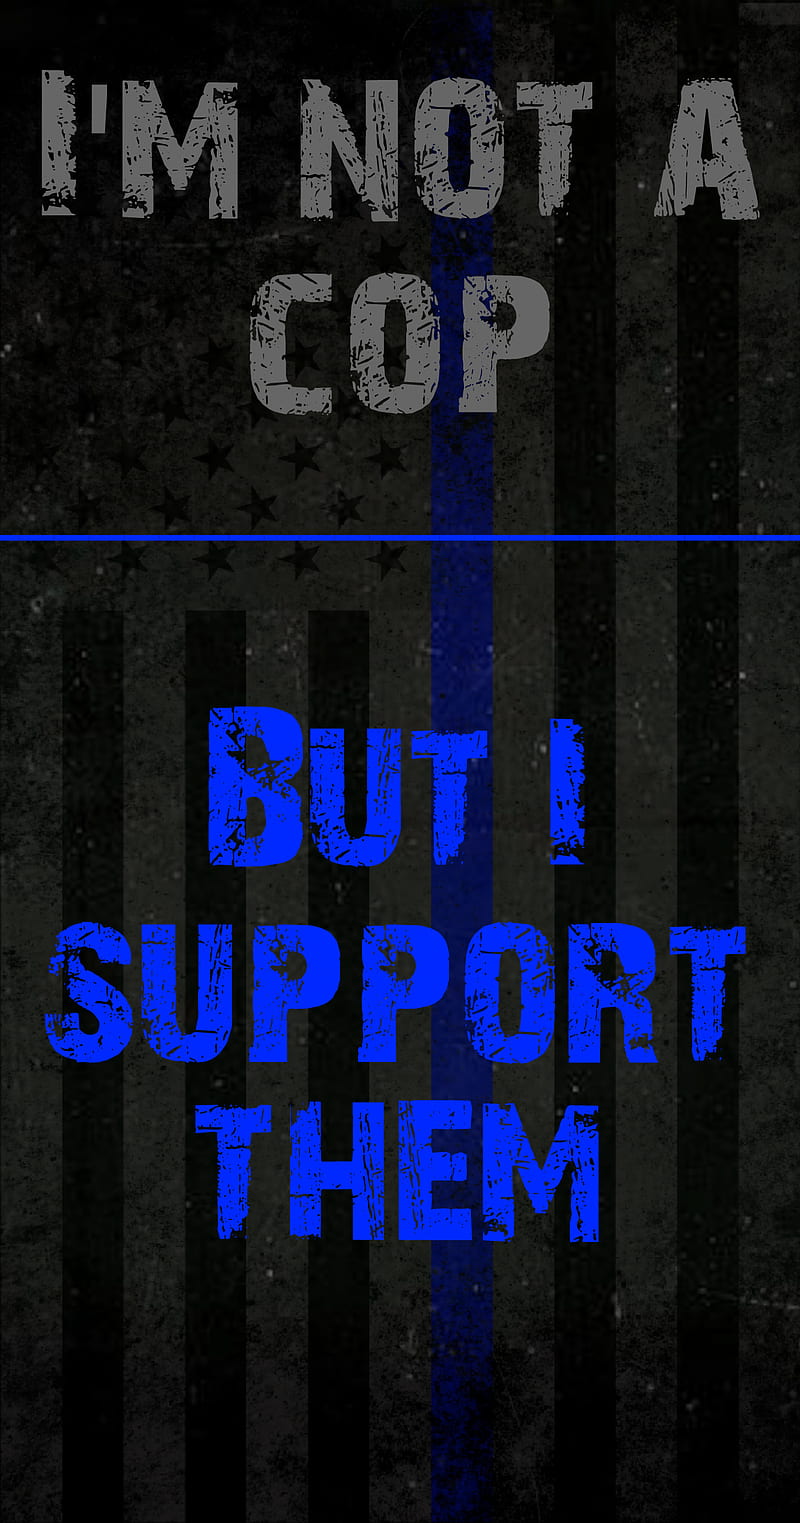 Support, america, blue thin line, police, respect, HD phone wallpaper